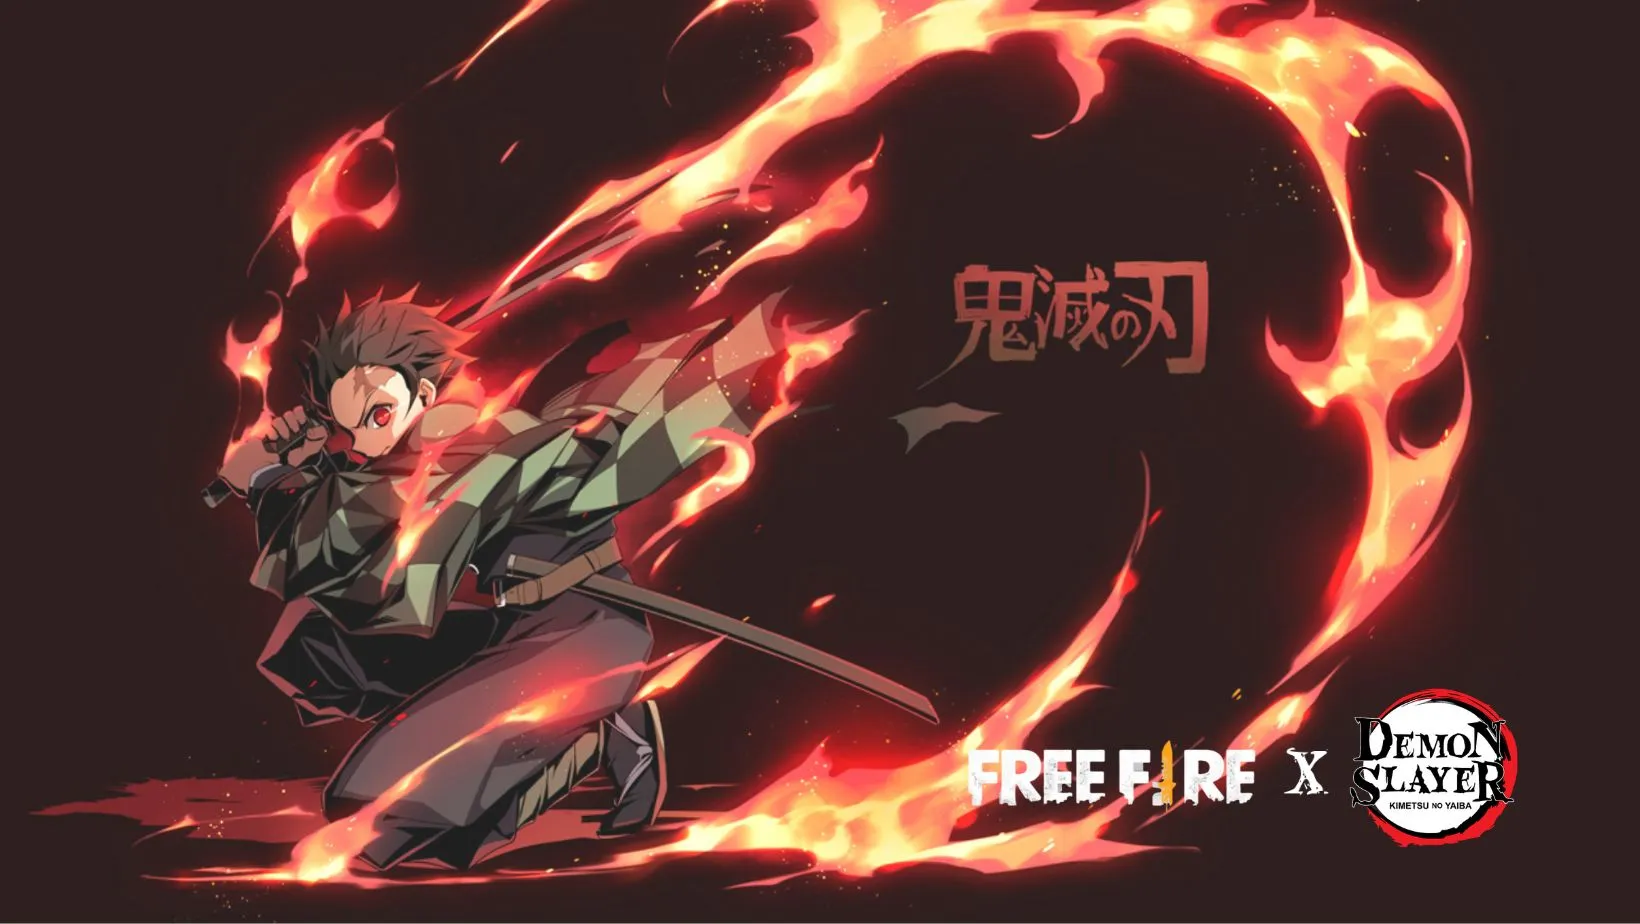 Anime Meets Battle Royale in Free Fire x Demon Slayer Collaboration